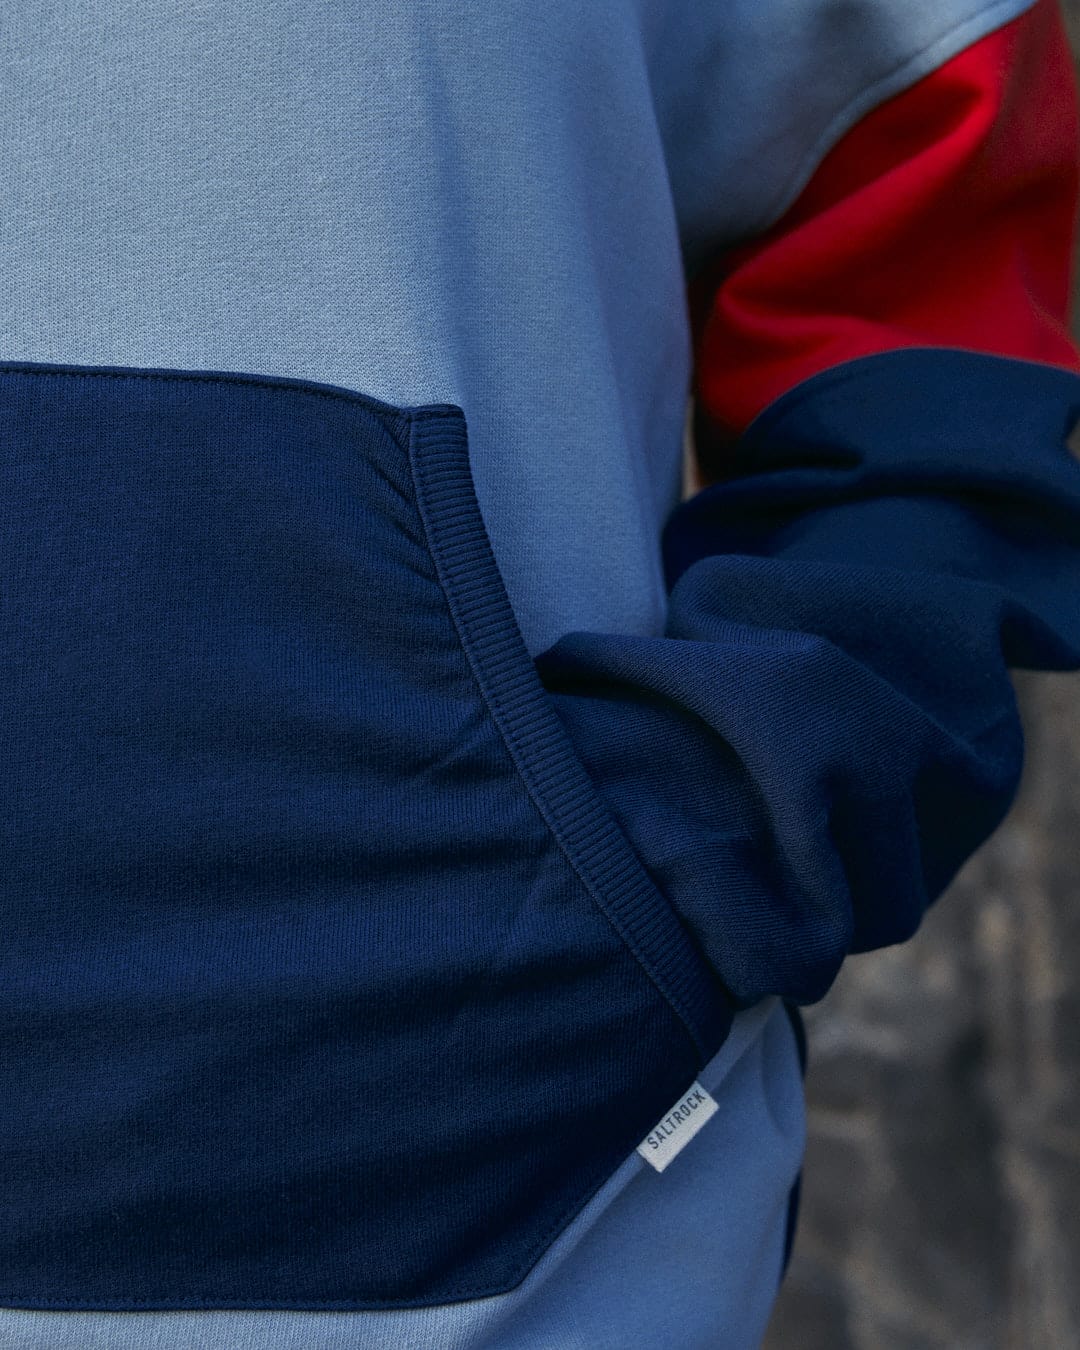 A man wearing a blue and red hoodie with Contrast paneling - the Anya Women's Pop Hoodie in Blue by Saltrock.